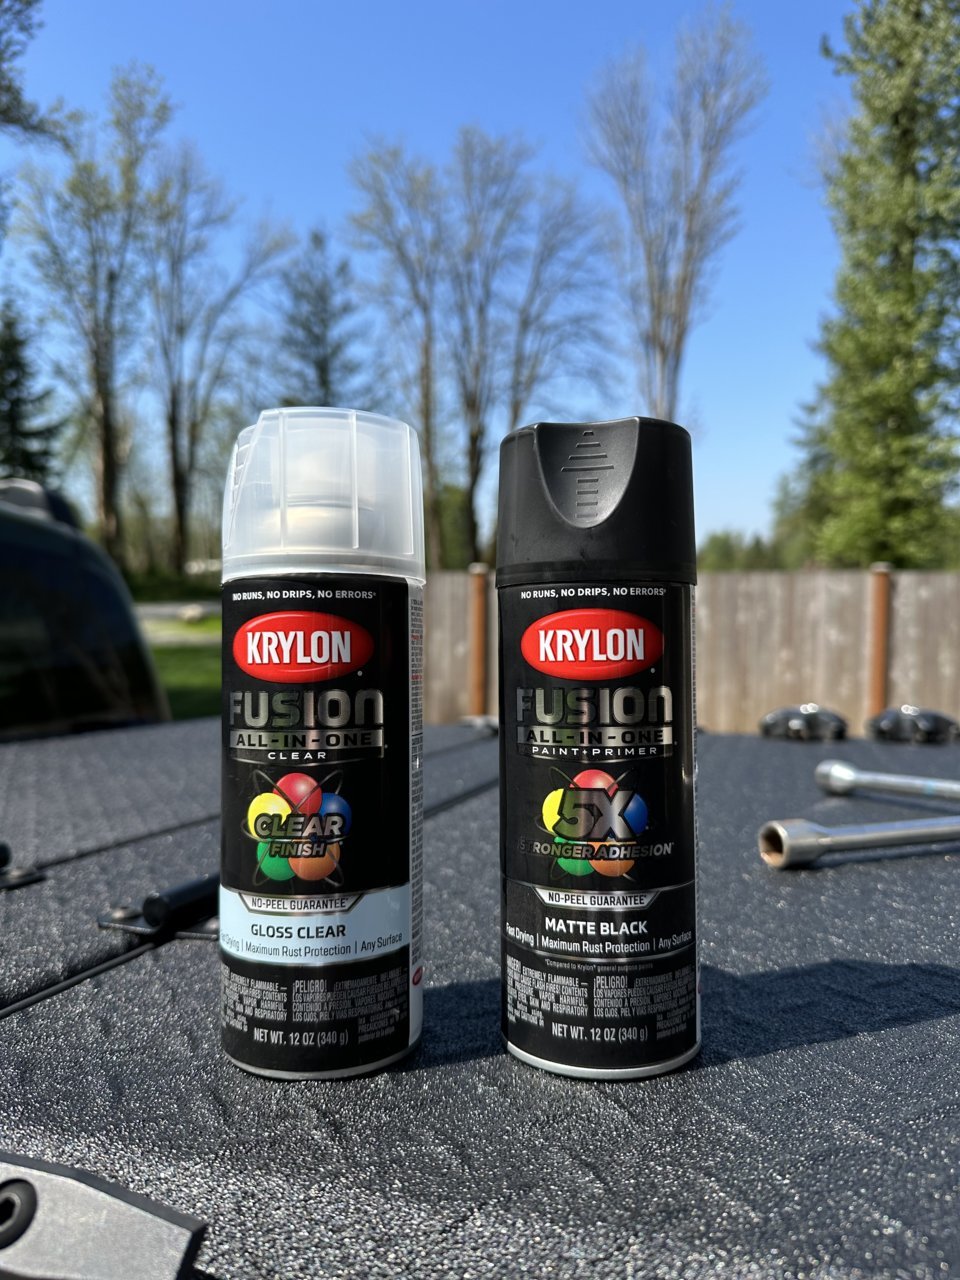 Drexler Ceramic Coating Kit 9h - Professional Grade, 3-5 Years of Gloss &  Protection for Cars, 9h Hardness, Extra Hydrophobic Coating, High Shine